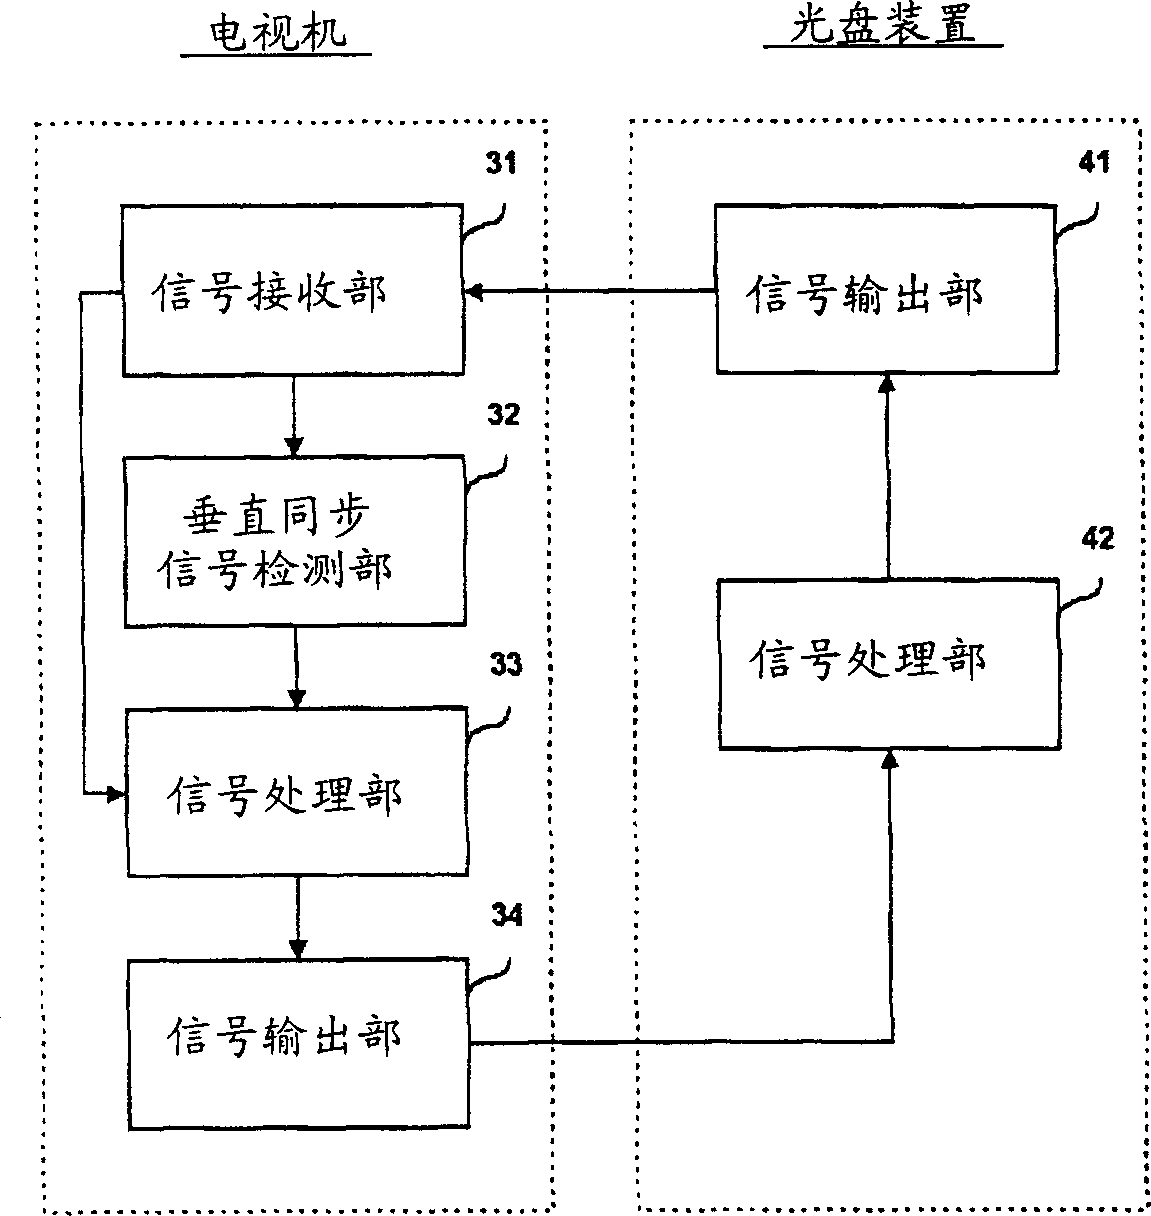 Method for processing output signal in optical disk apparatus according to scanning mode of TV set